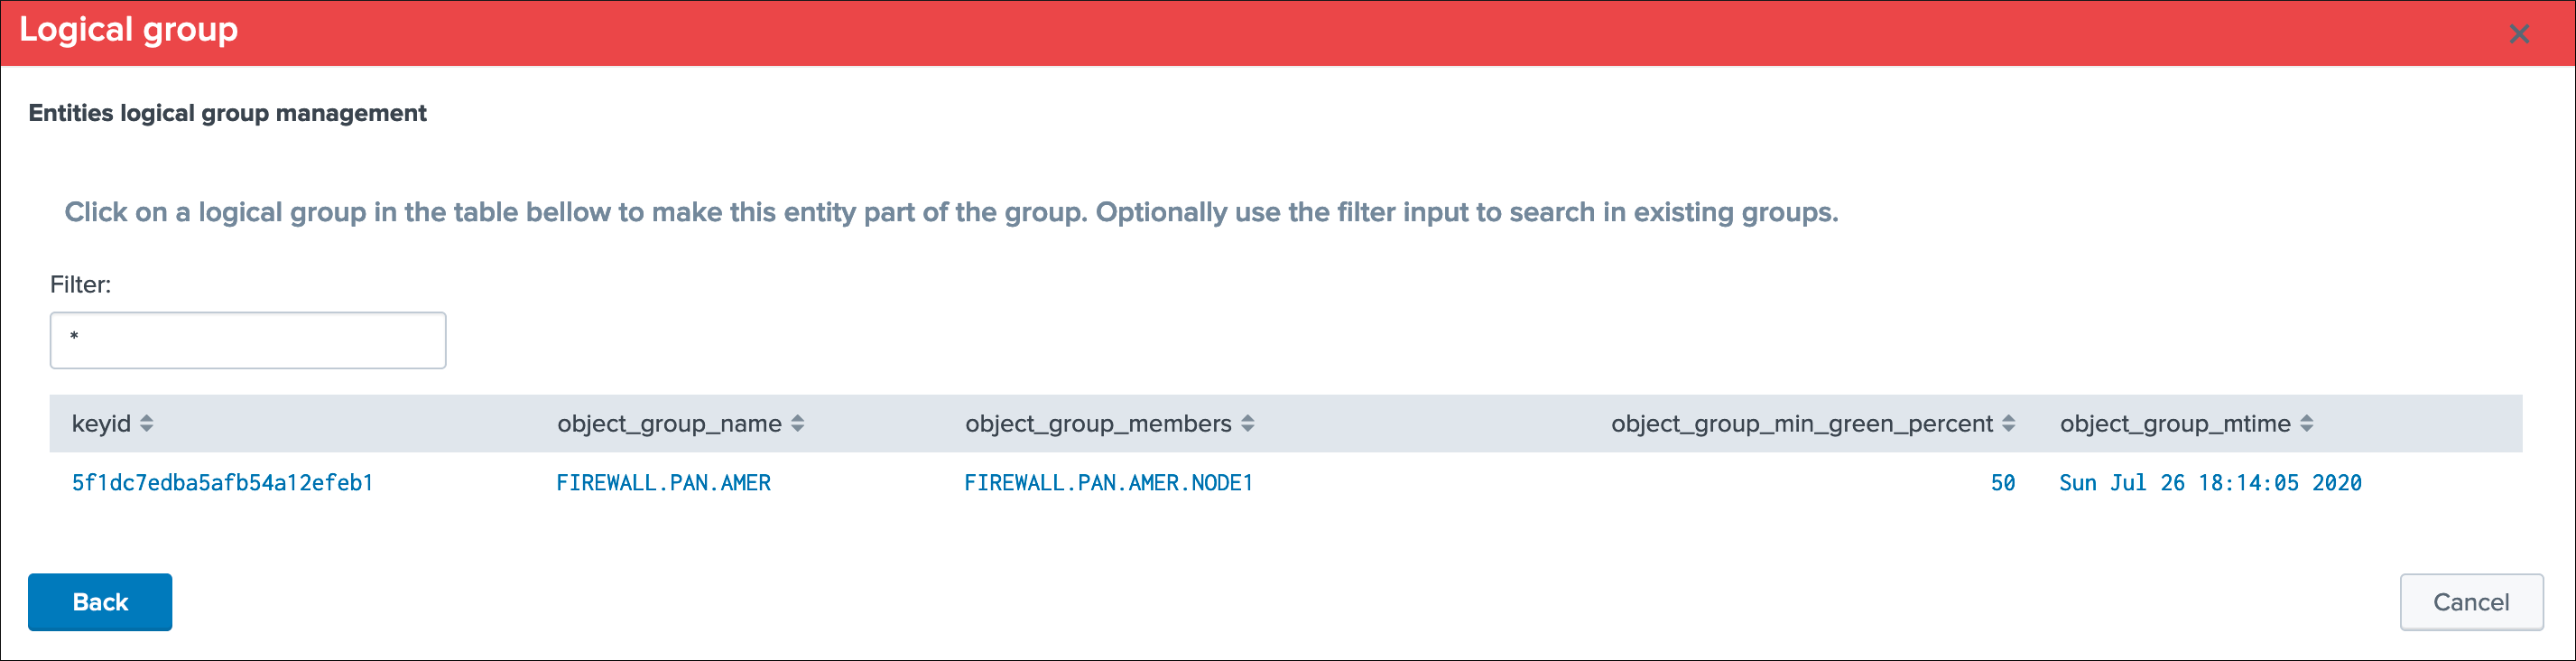 logical_groups_example4.png